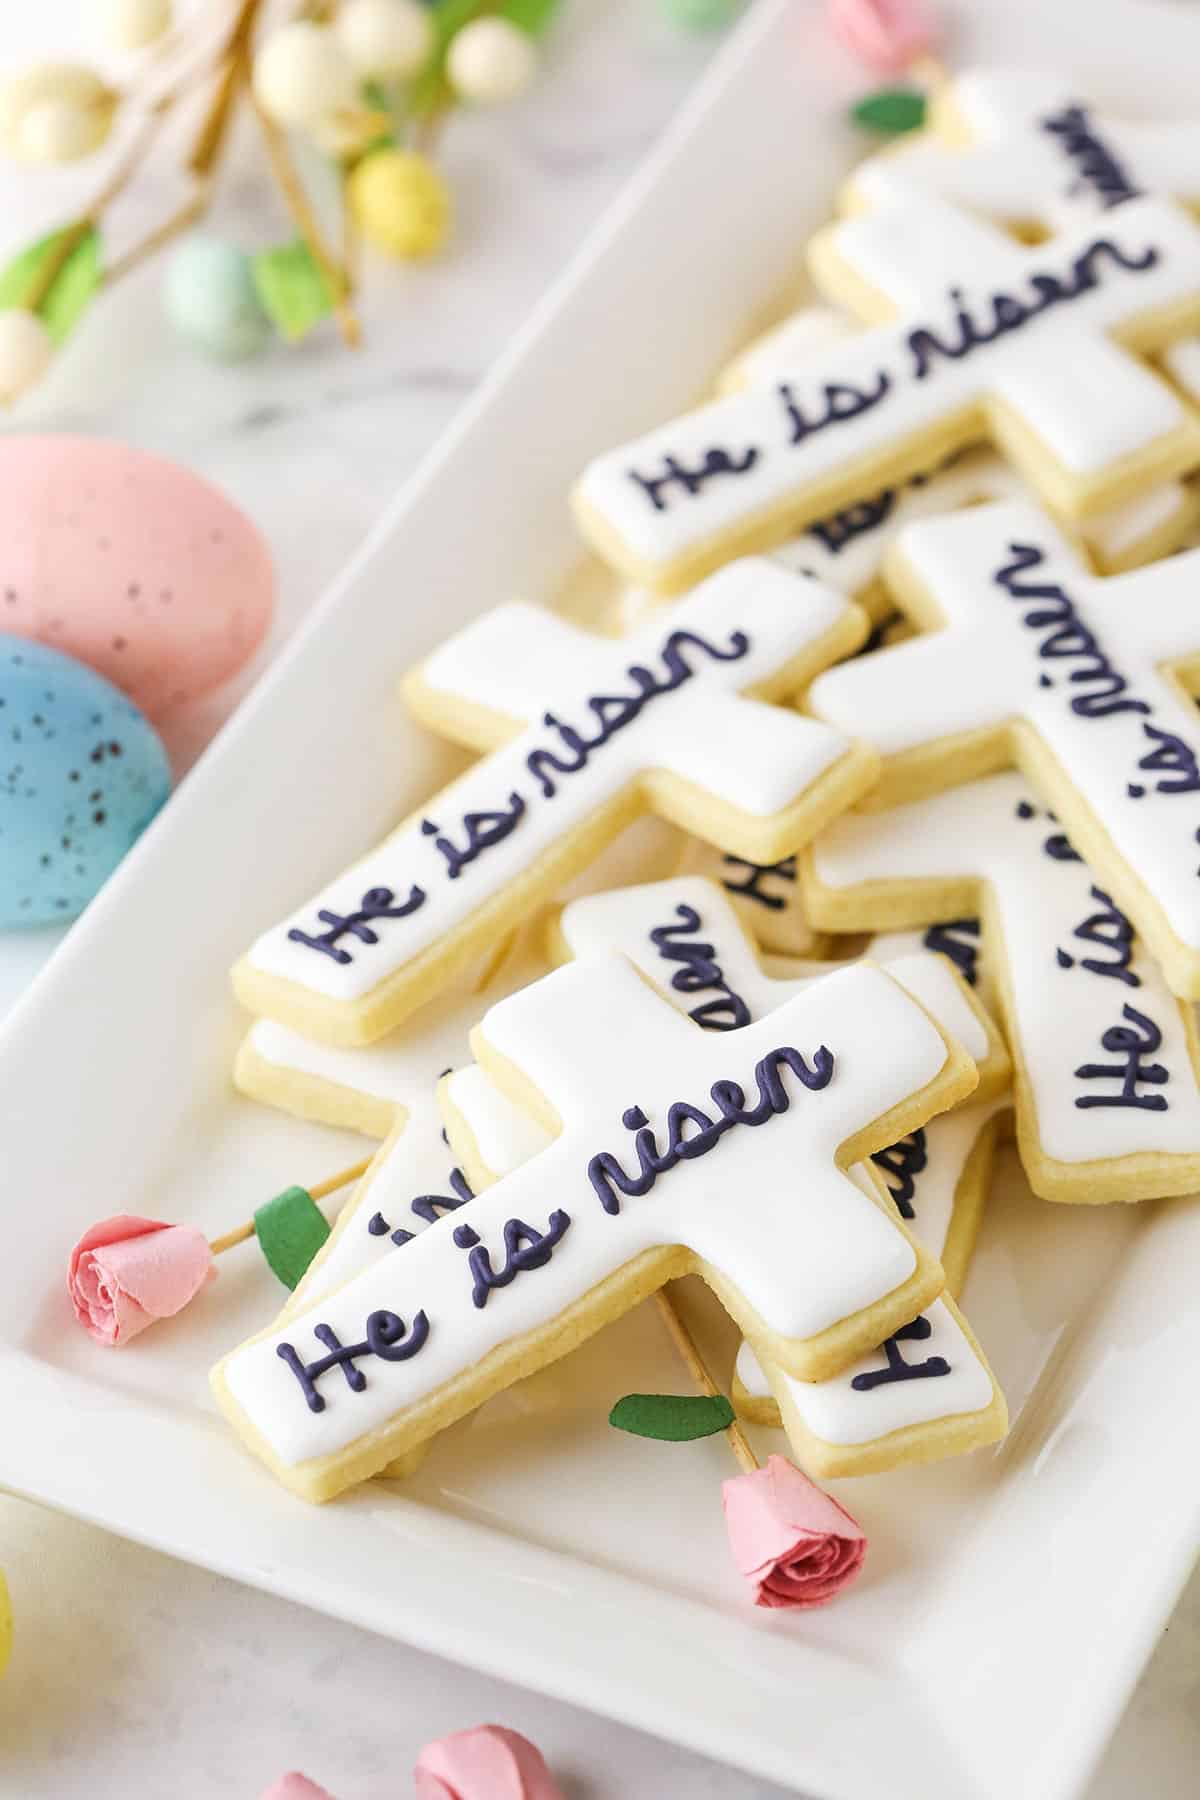 "He Is Risen" Cutout Cookies layered on a white platter with painted Easter eggs in the background